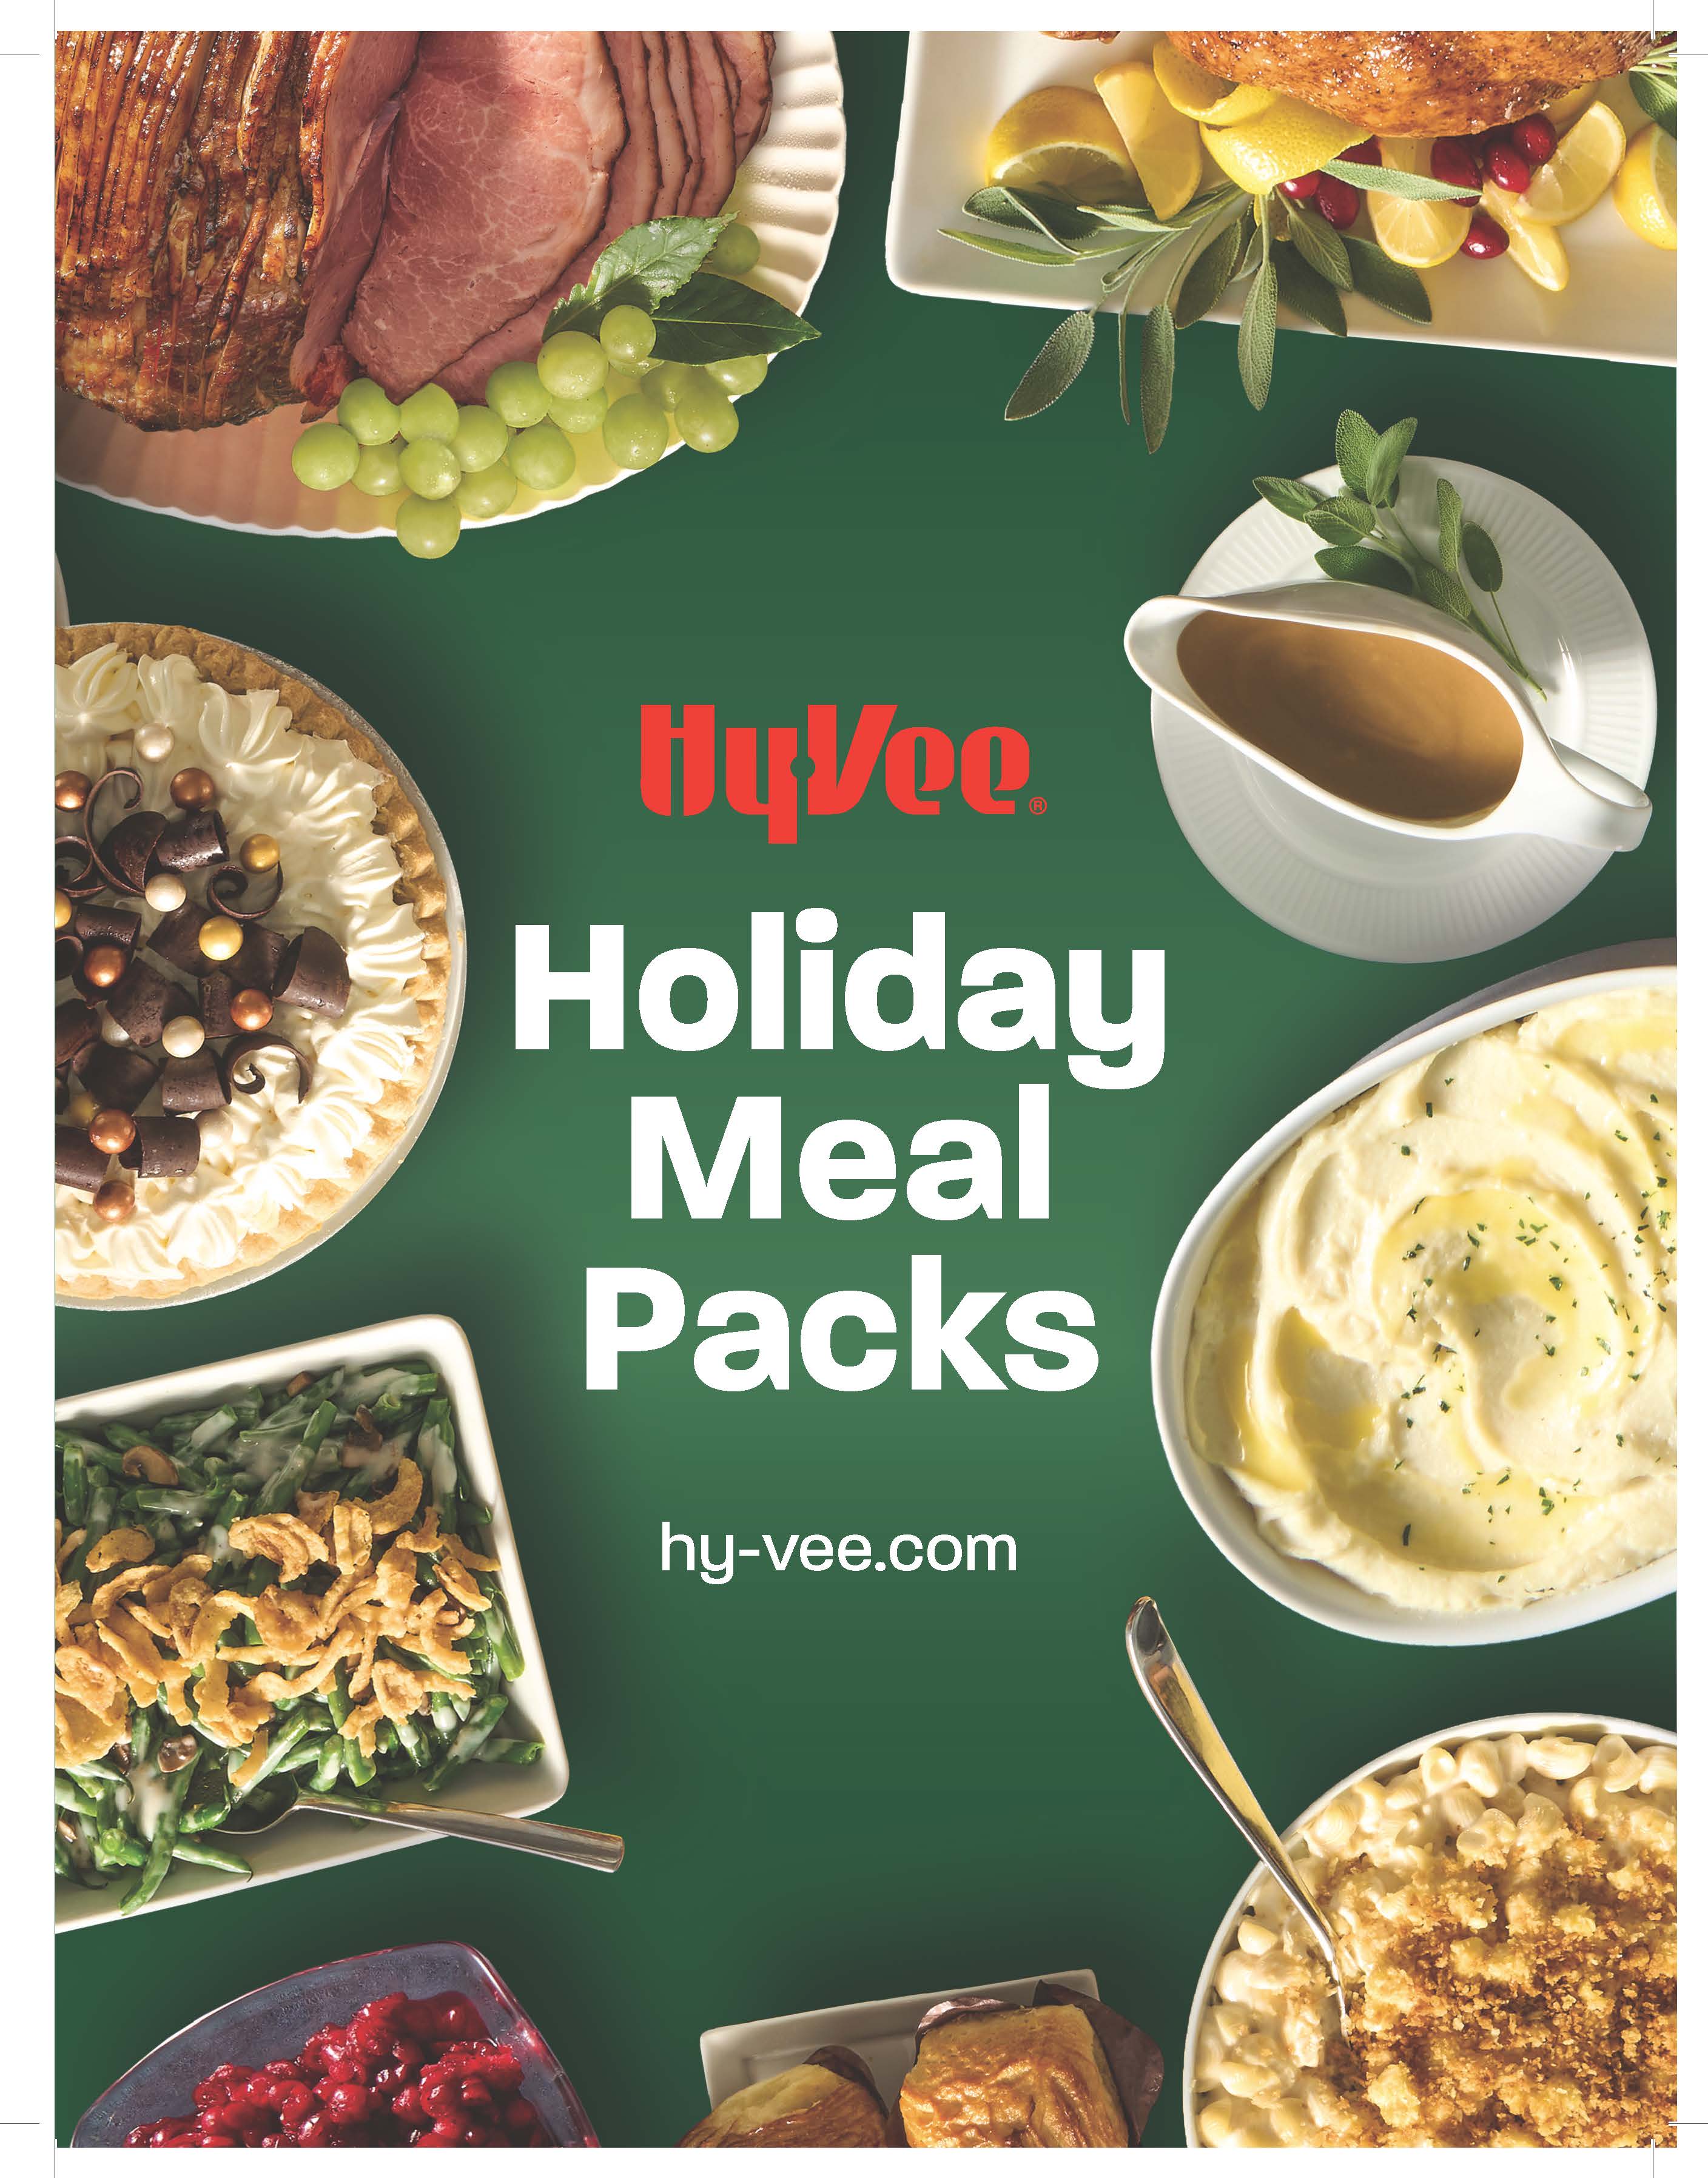 Hy-Vee Holiday Meals Traditional and Hickory House Dinner Sides Cooking Instructions